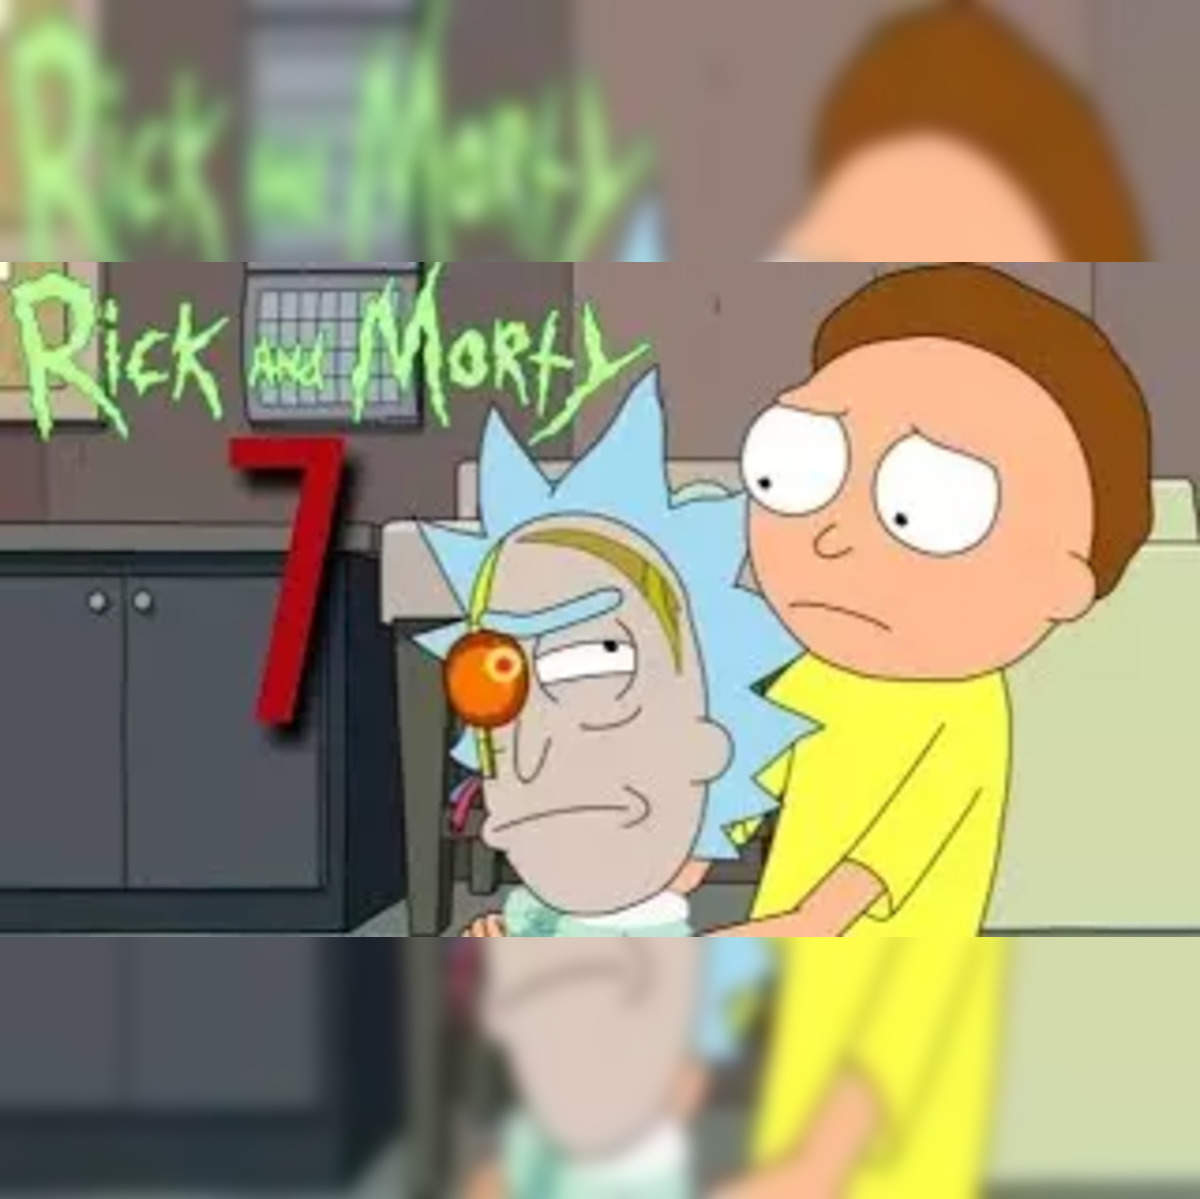 Rick and Morty Season 7 Episode 8 Streaming: How to Watch & Stream Online